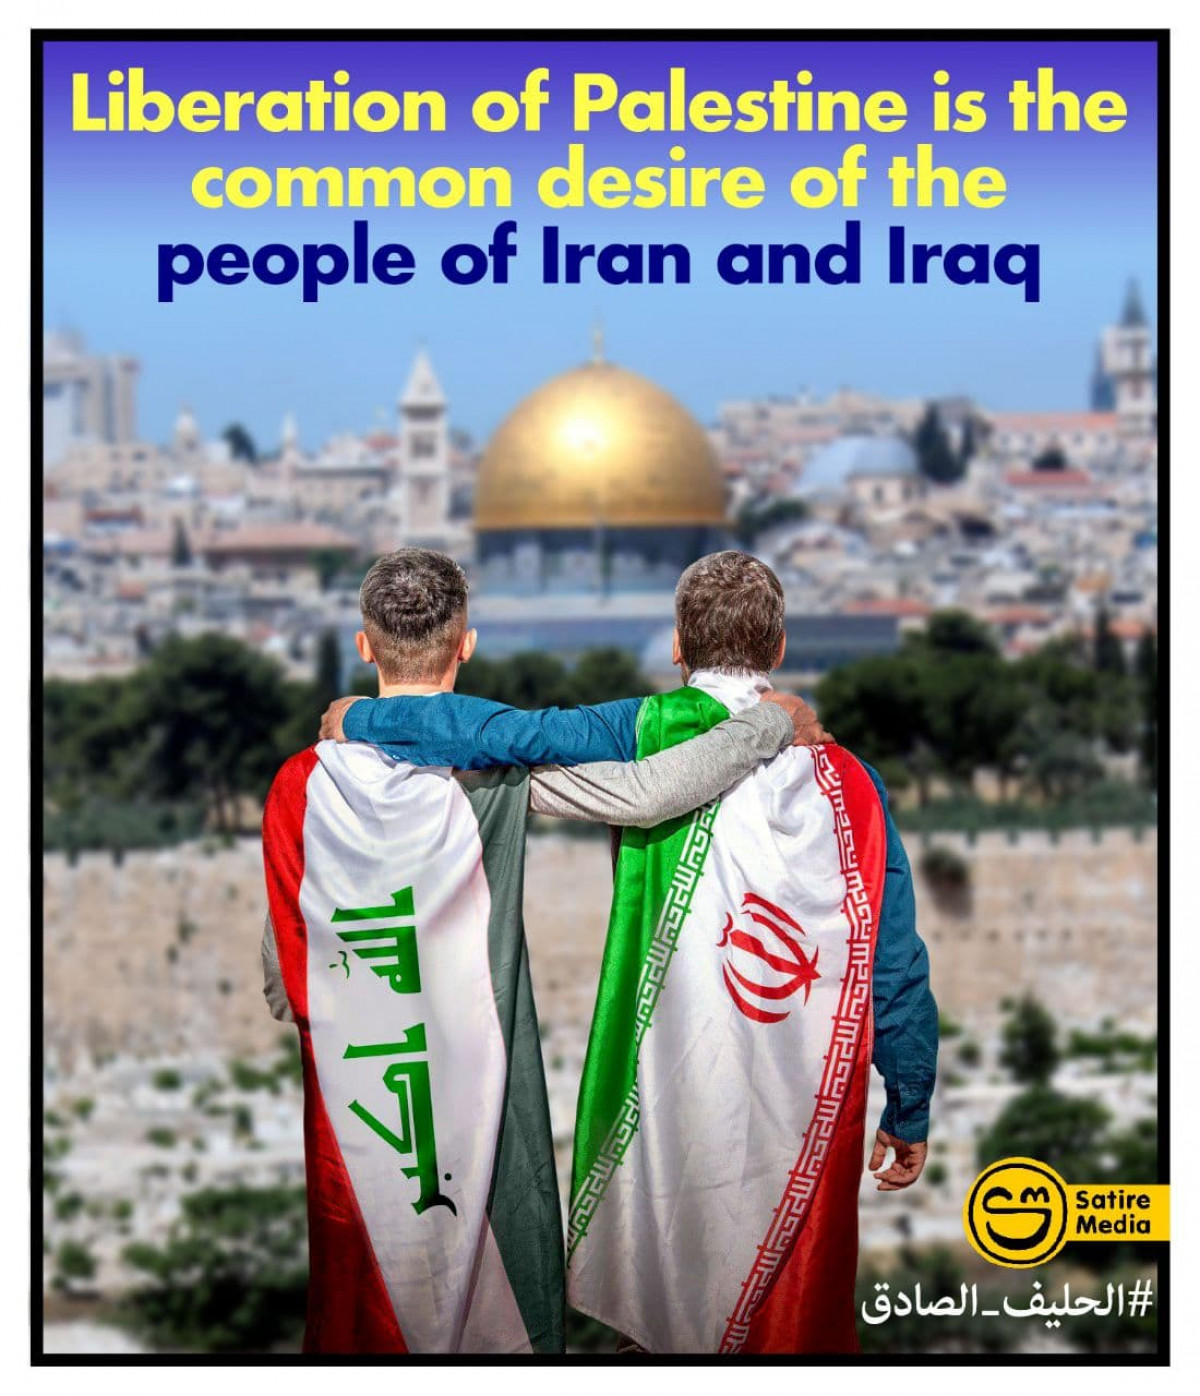 Liberation of Palestine is the common desire of the people of Iran and Iraq